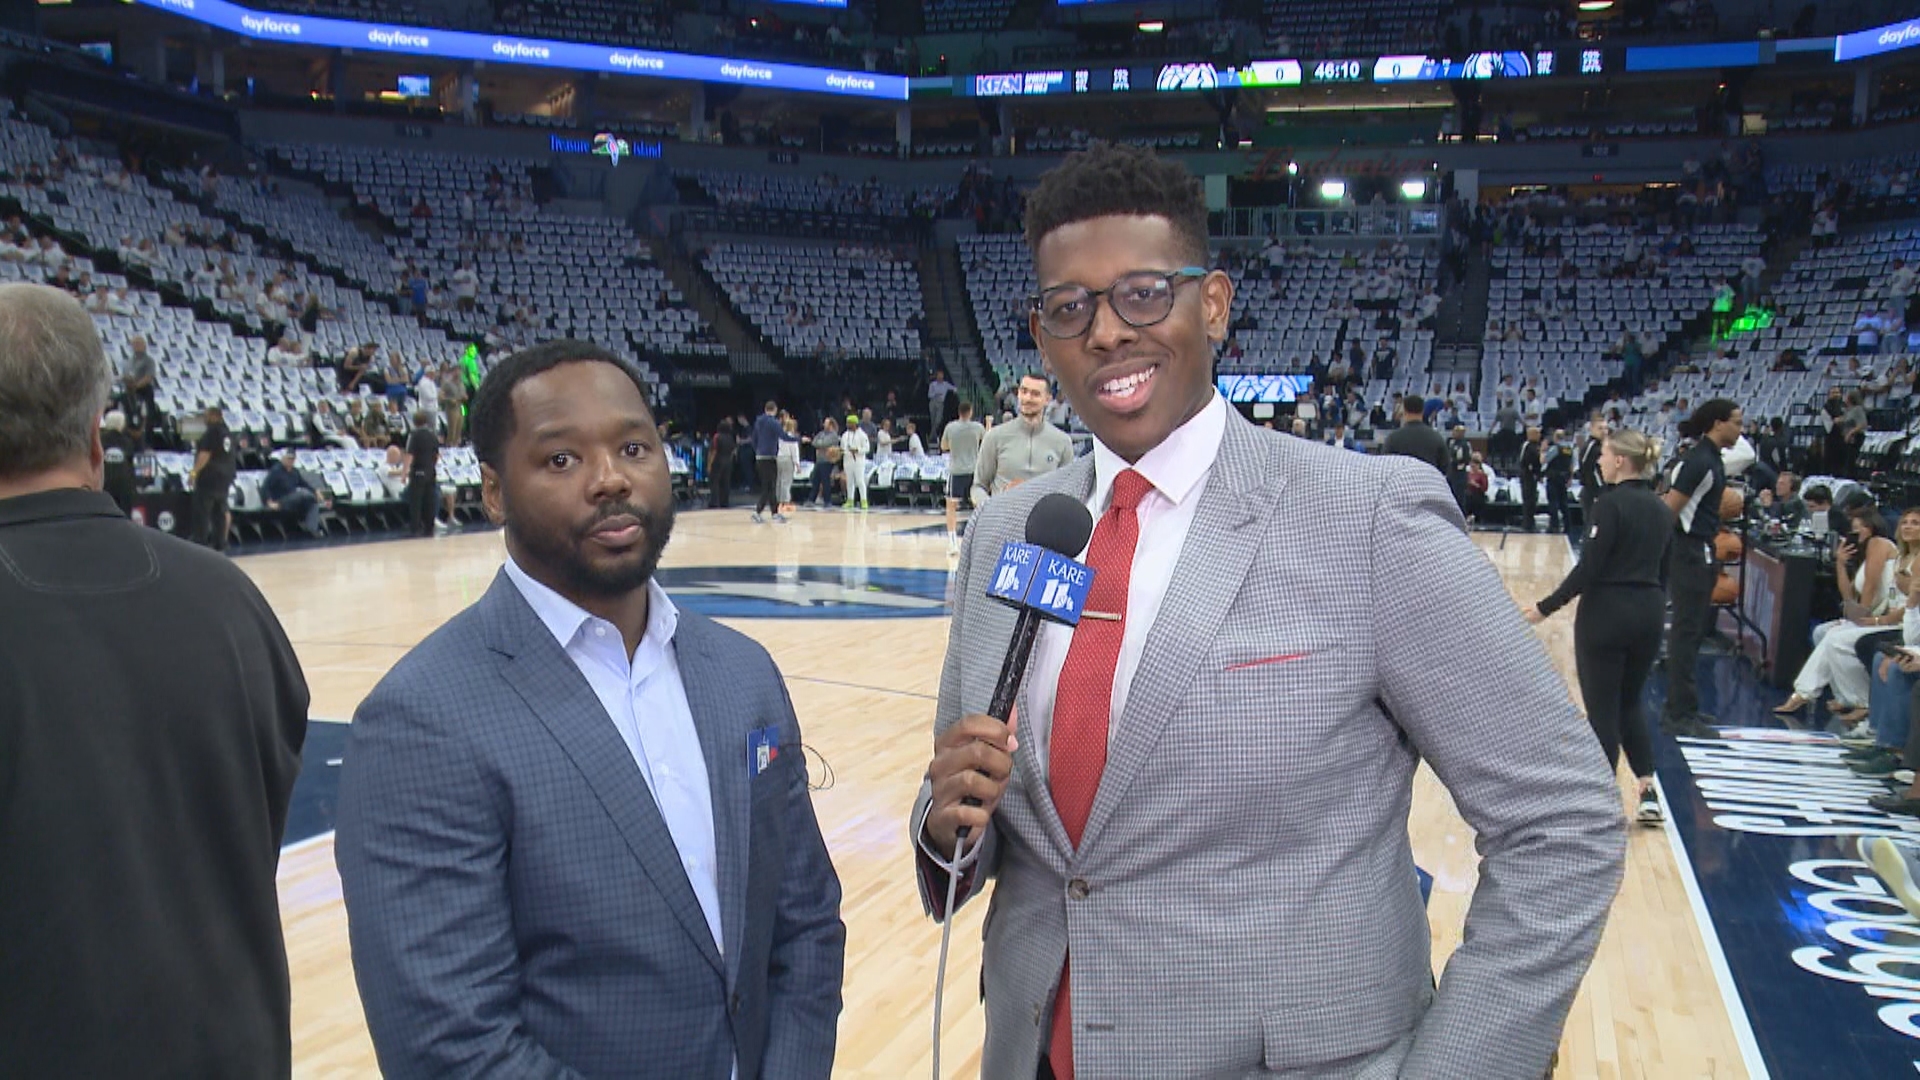 KARE 11's Reggie Wilson caught up with Yahoo's senior NBA reporter ahead of the Wolves' Game 5 matchup with the Mavericks.